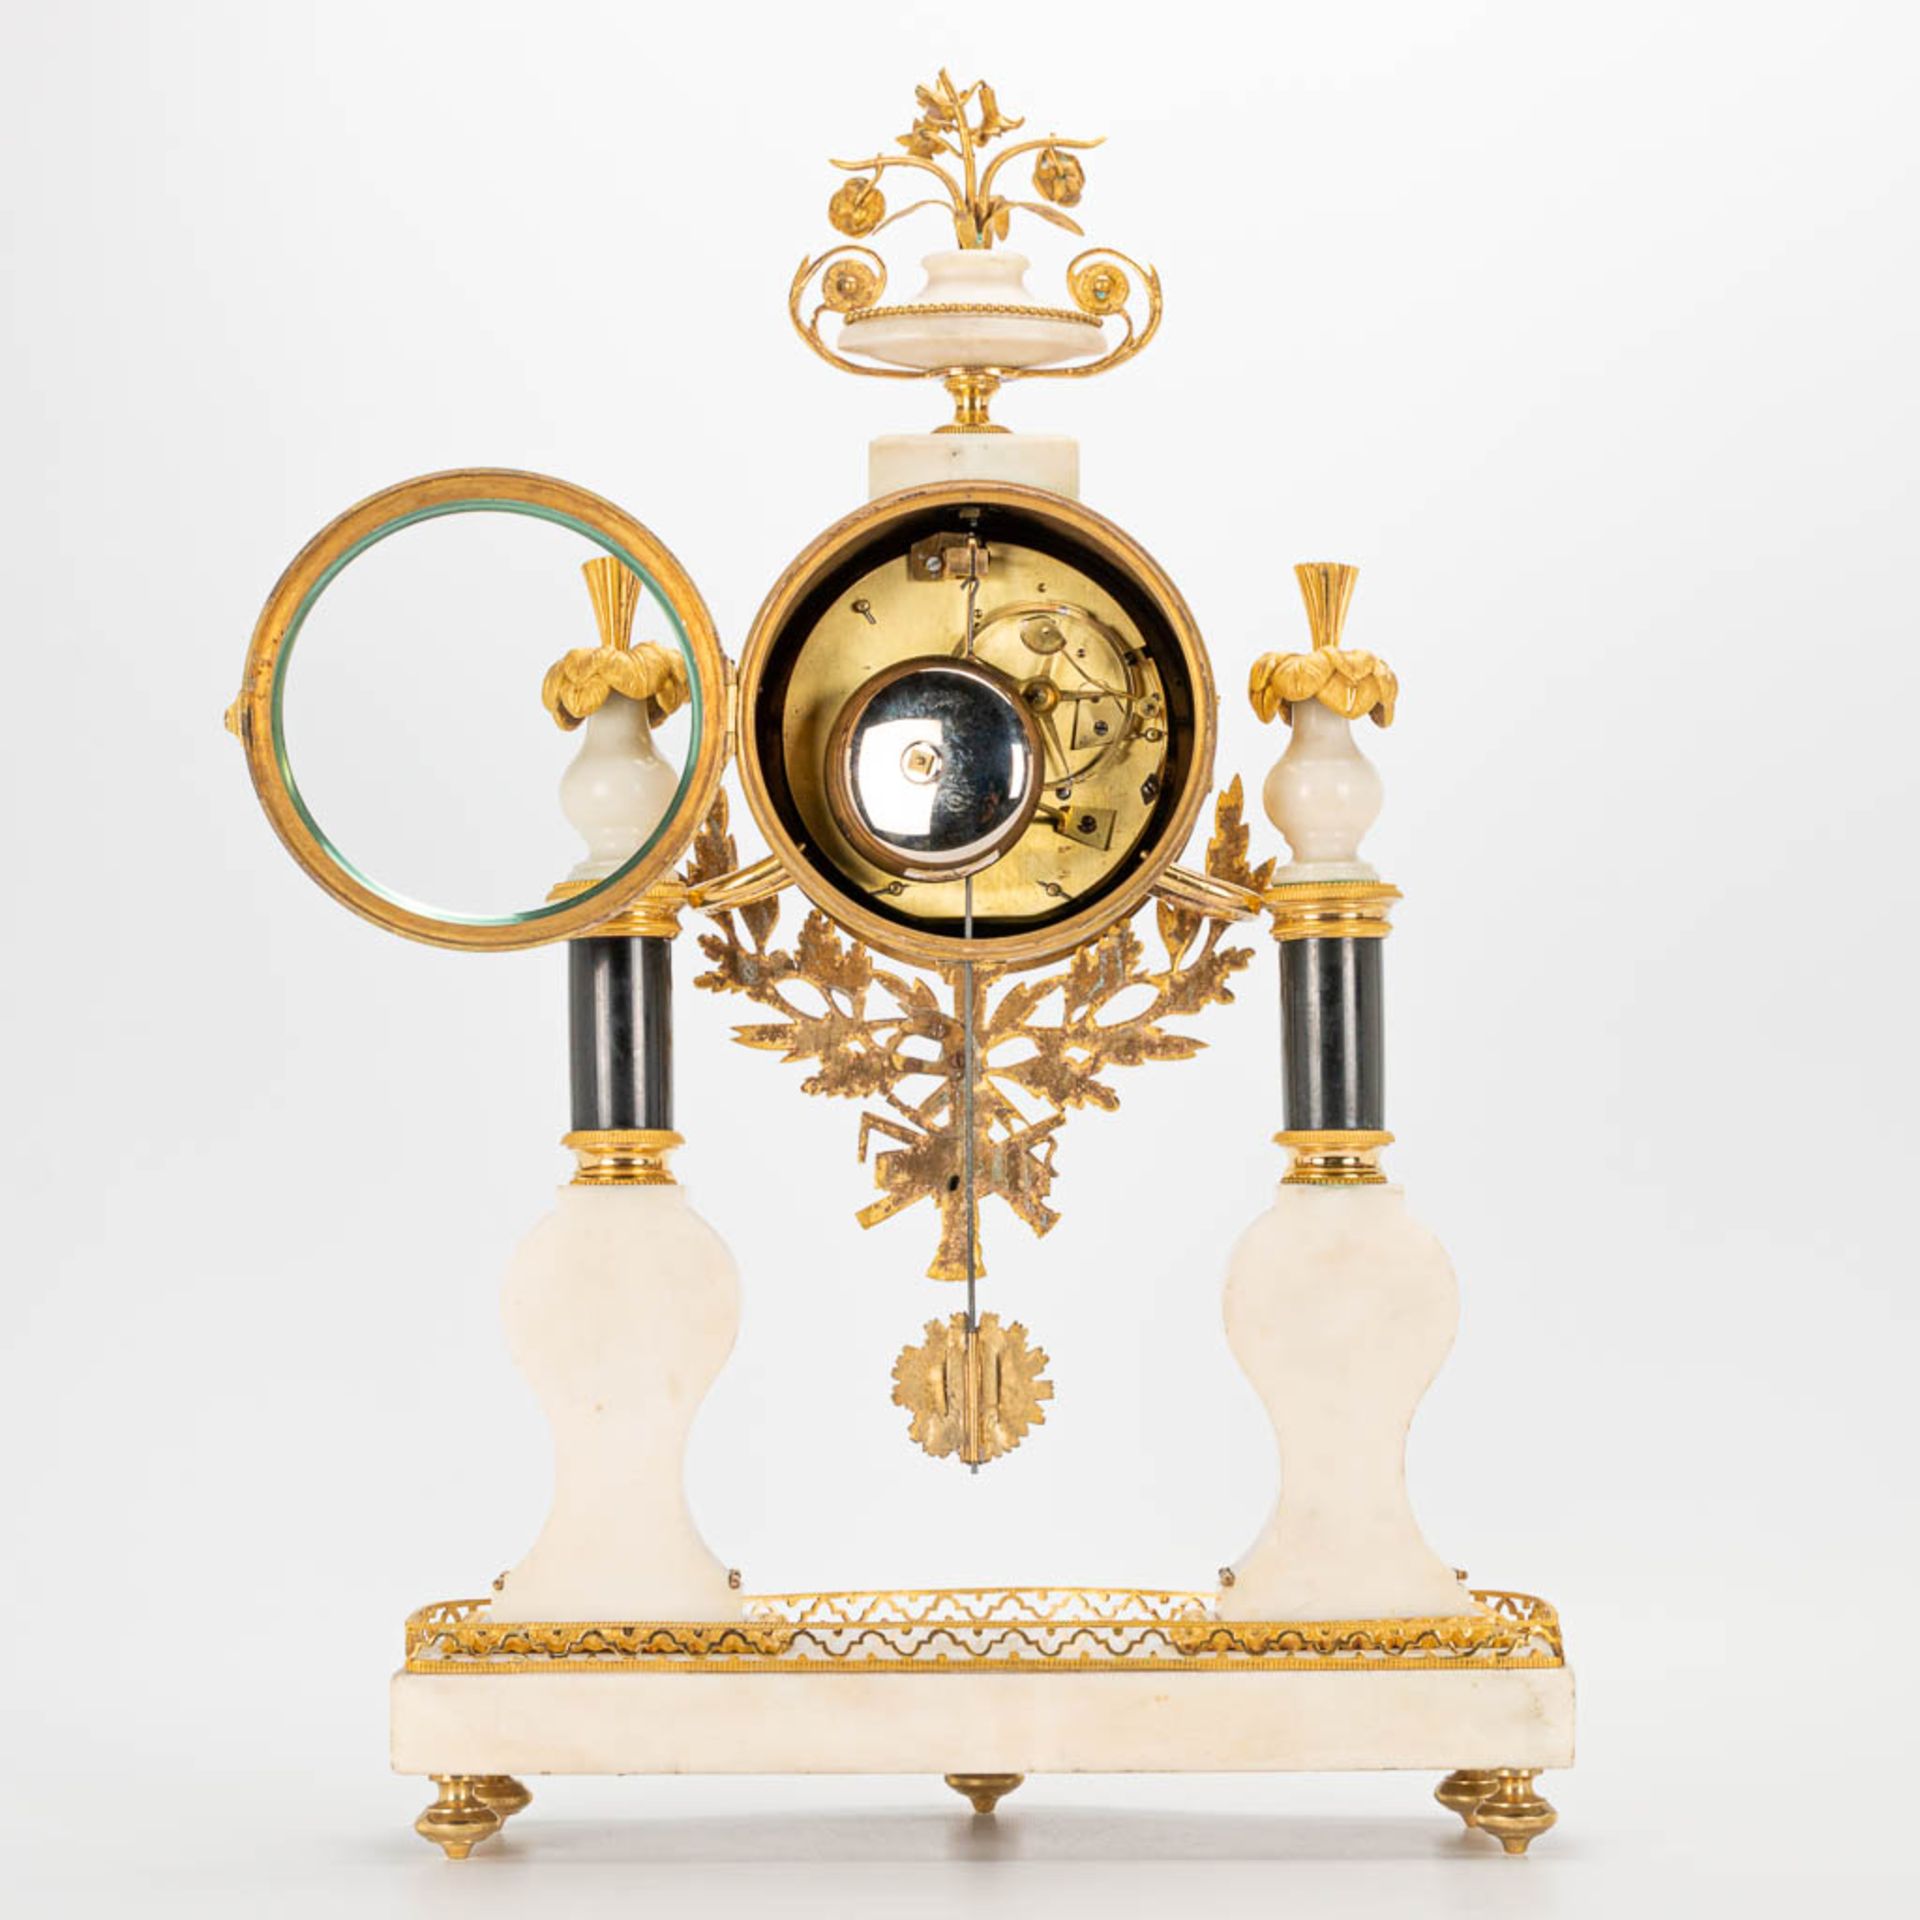 A Louis XVI style column clock made of bronze and marble, with handpainted Limoges plaques and marke - Image 10 of 23